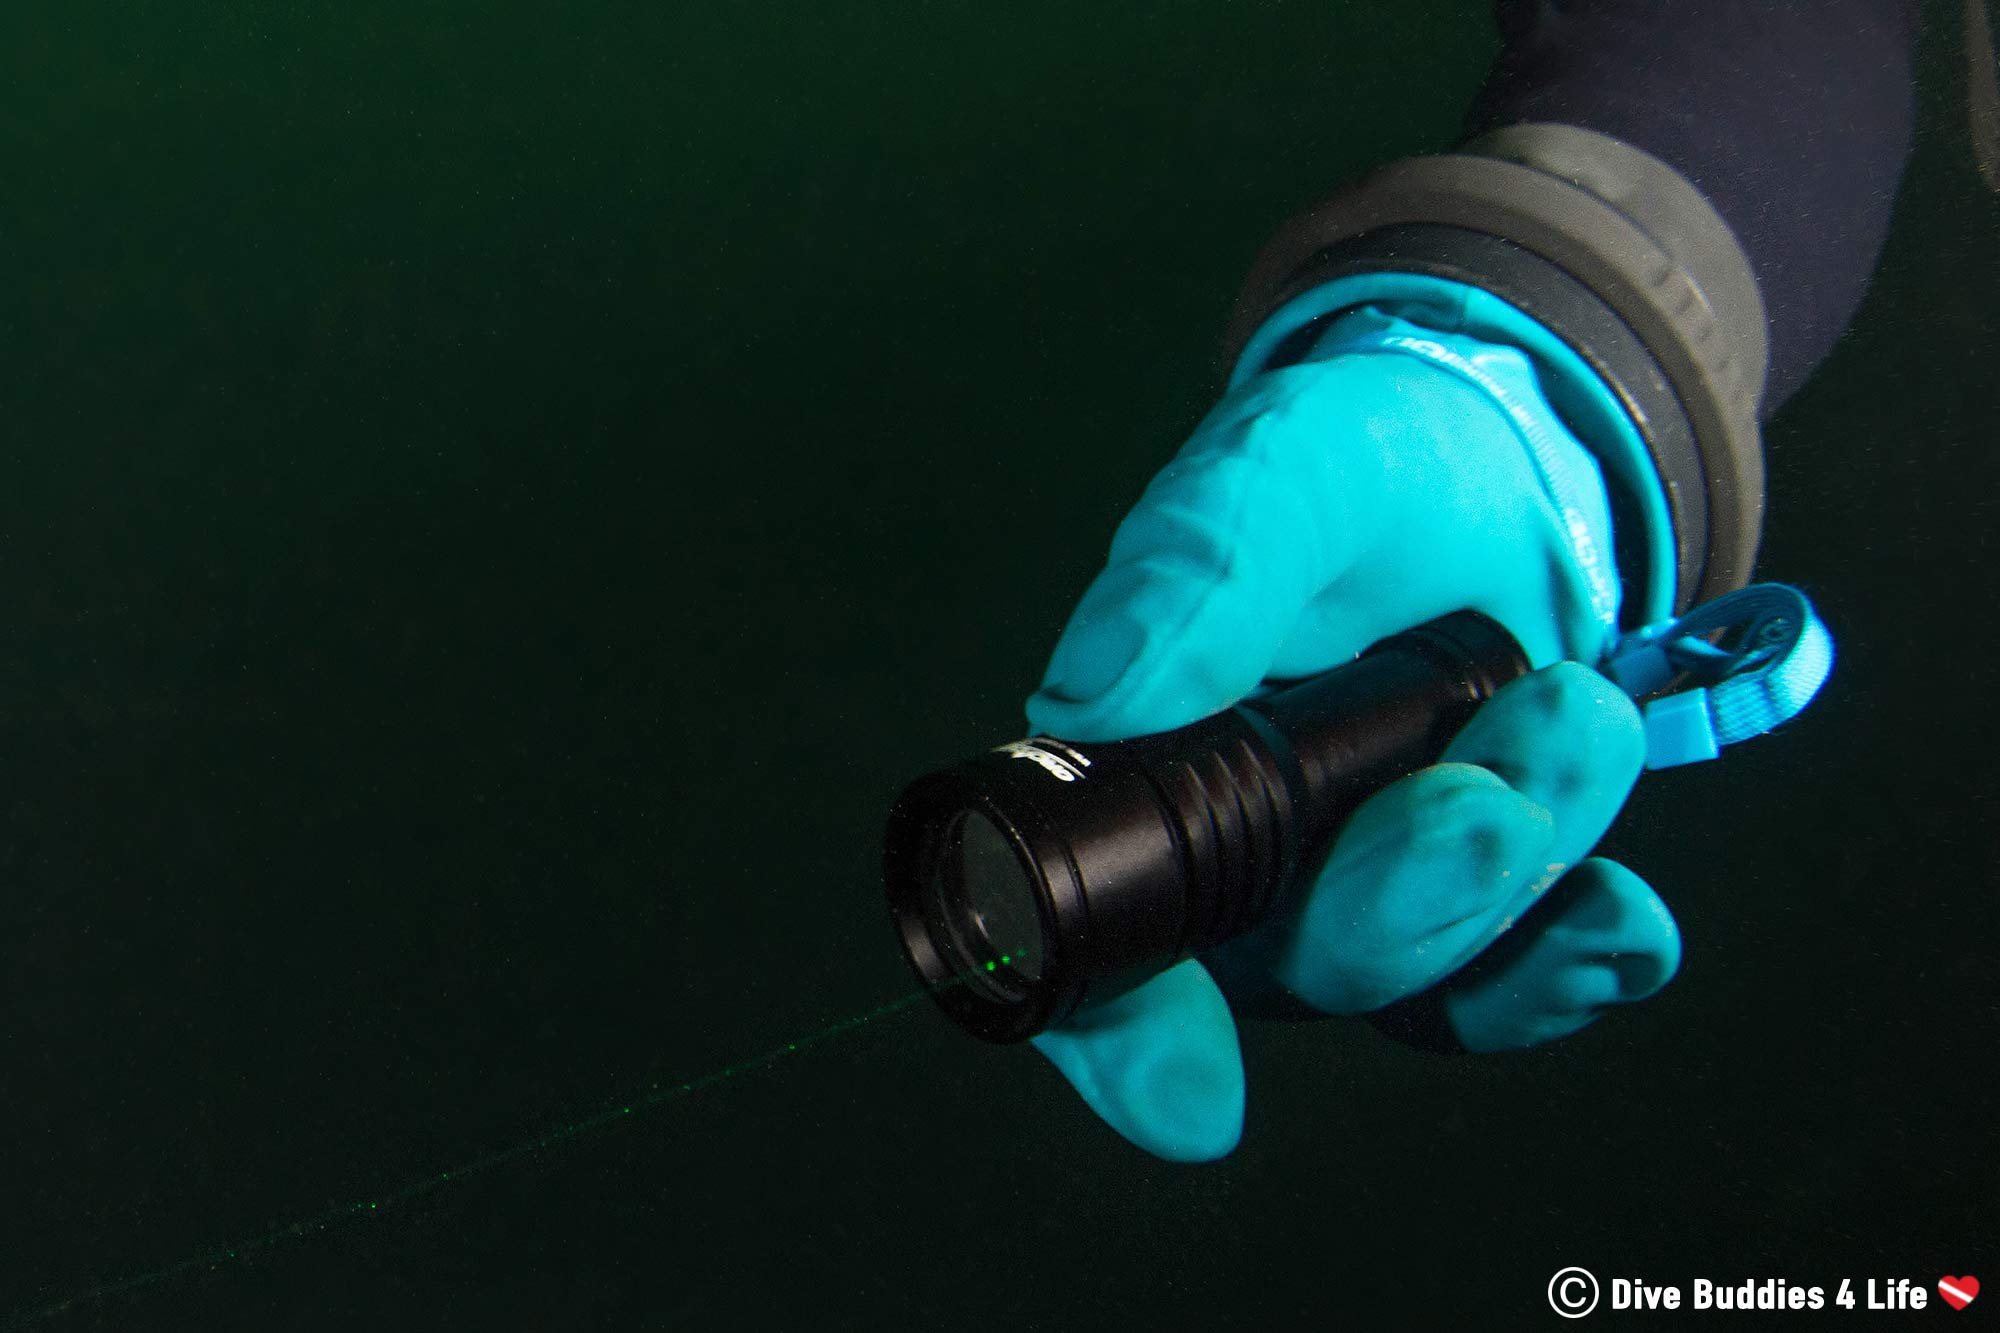 The Green Laser On The OrcaTorch D570 GL In The Water